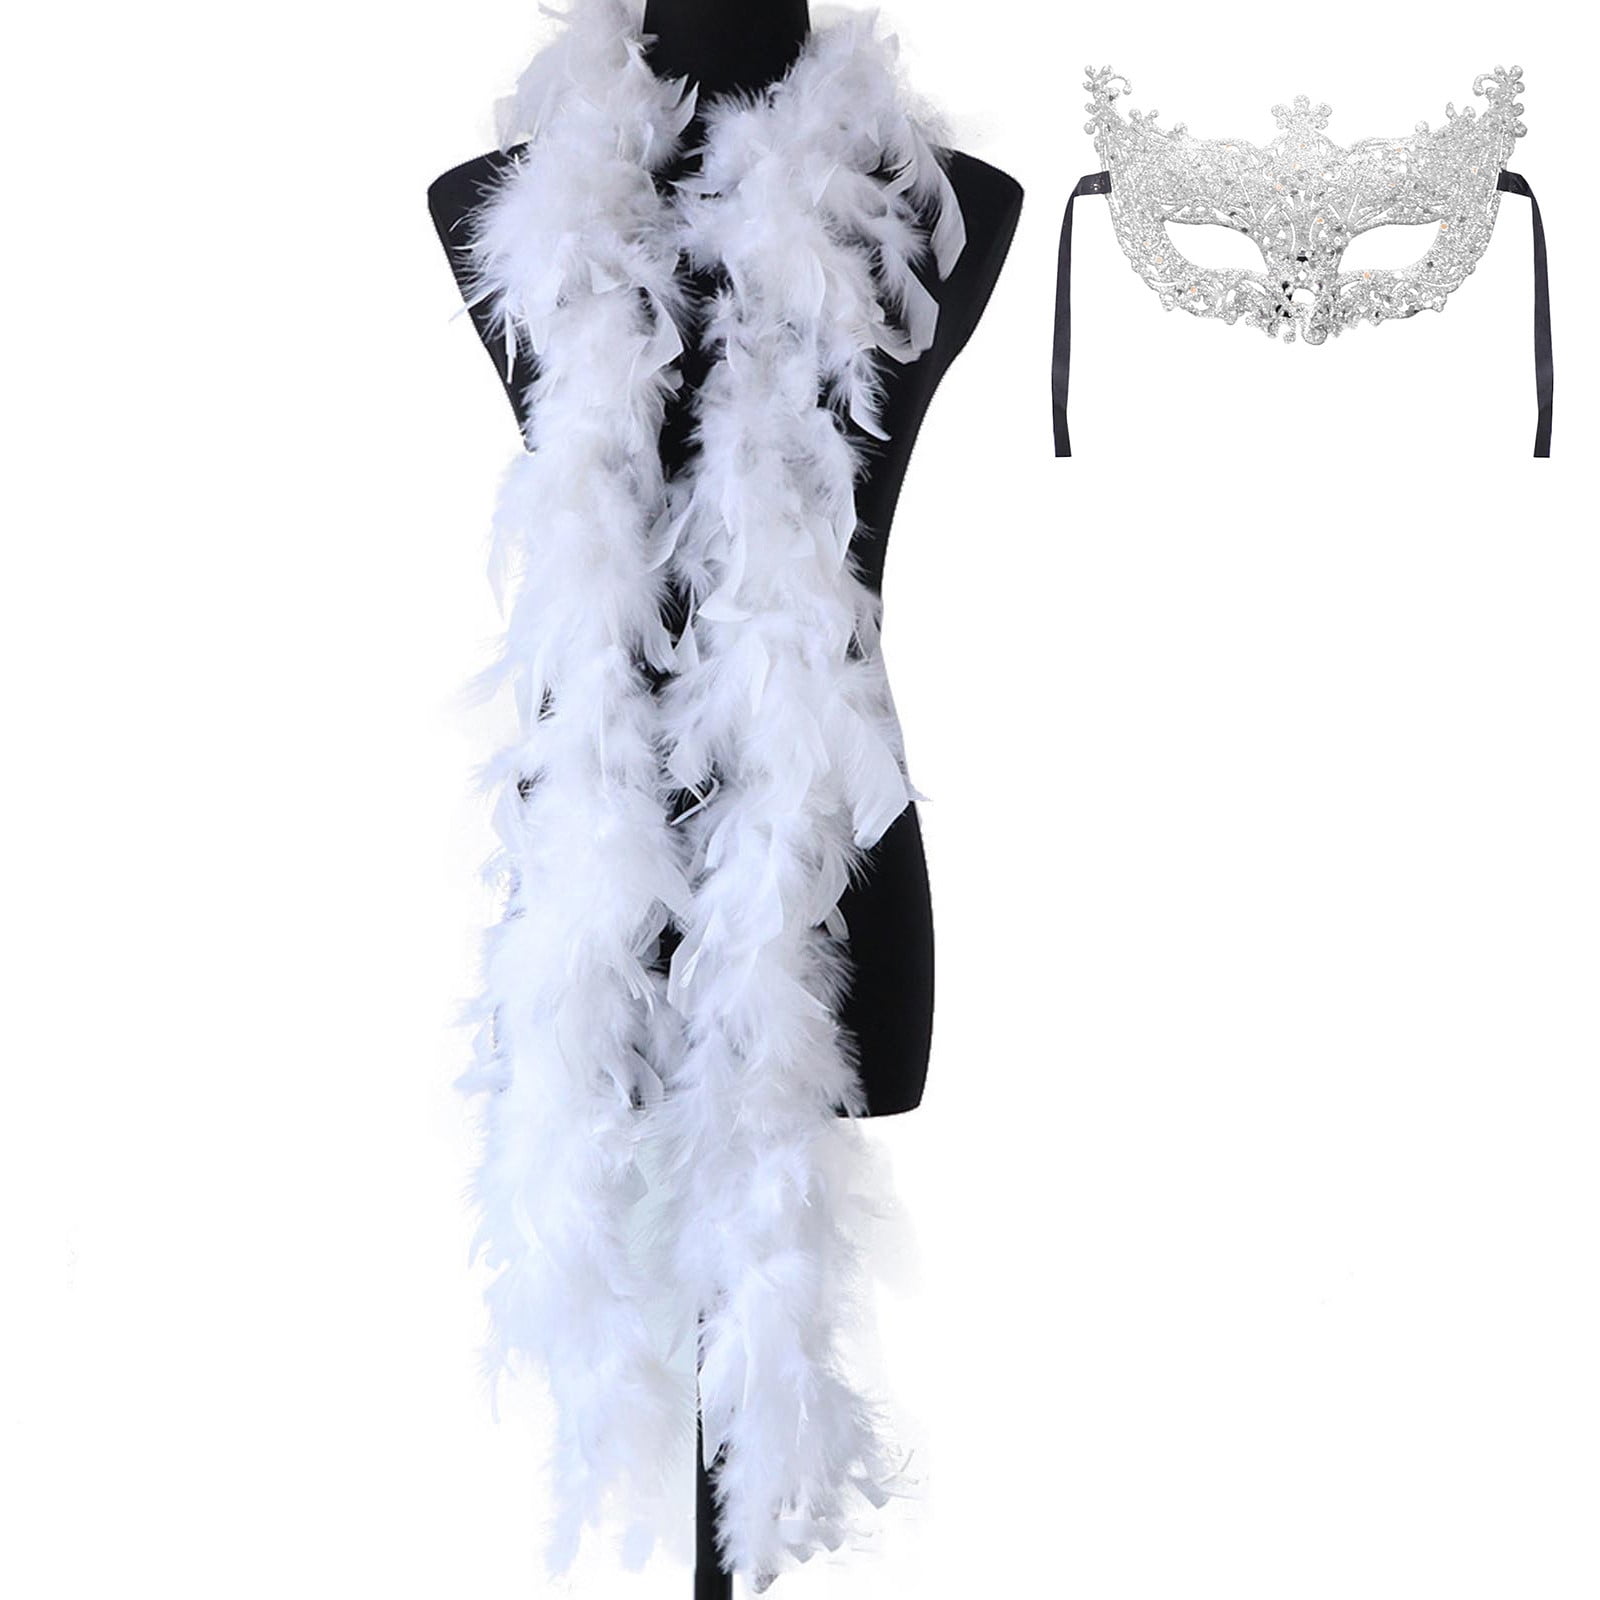 flydreamfeathers White 100 Gram Chandelle Feather Boa, 2 Yard Long-Great for Party, Wedding, Costume